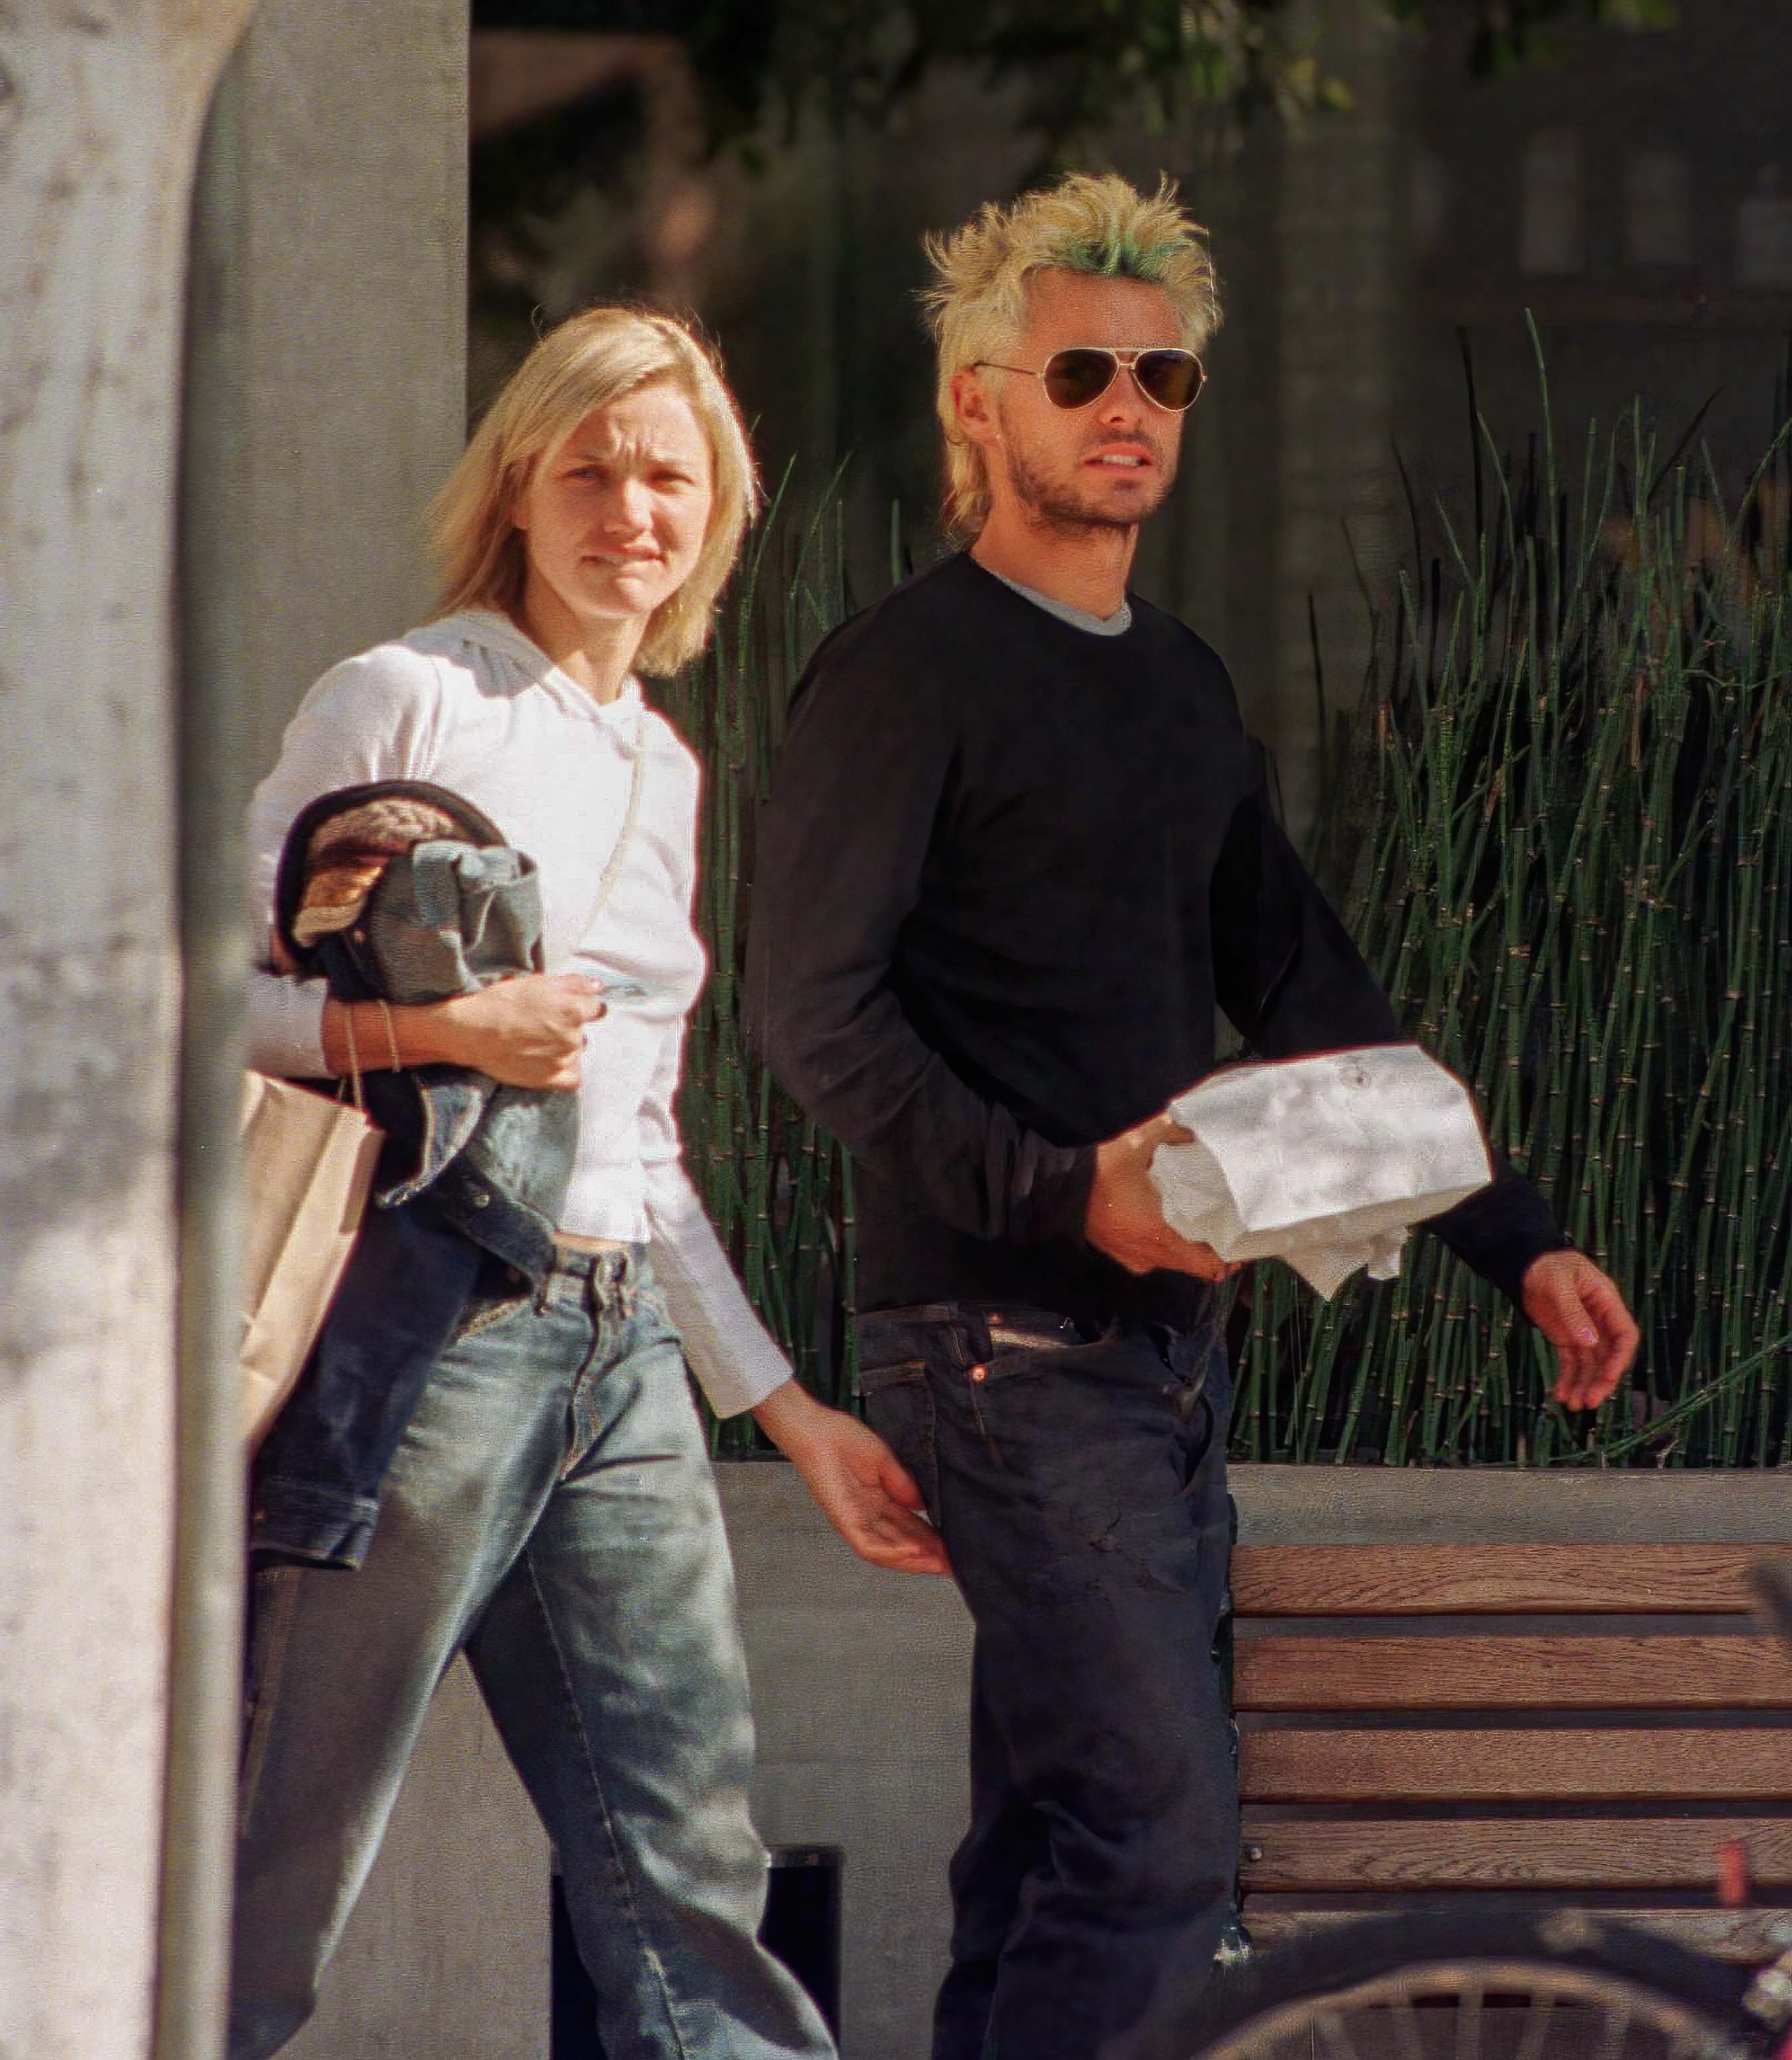 A paparazzi photo of Cameron Diaz and Jared Leto, clearly from the 2000s based on their baggy jeans and bleached hair, walking down the street together